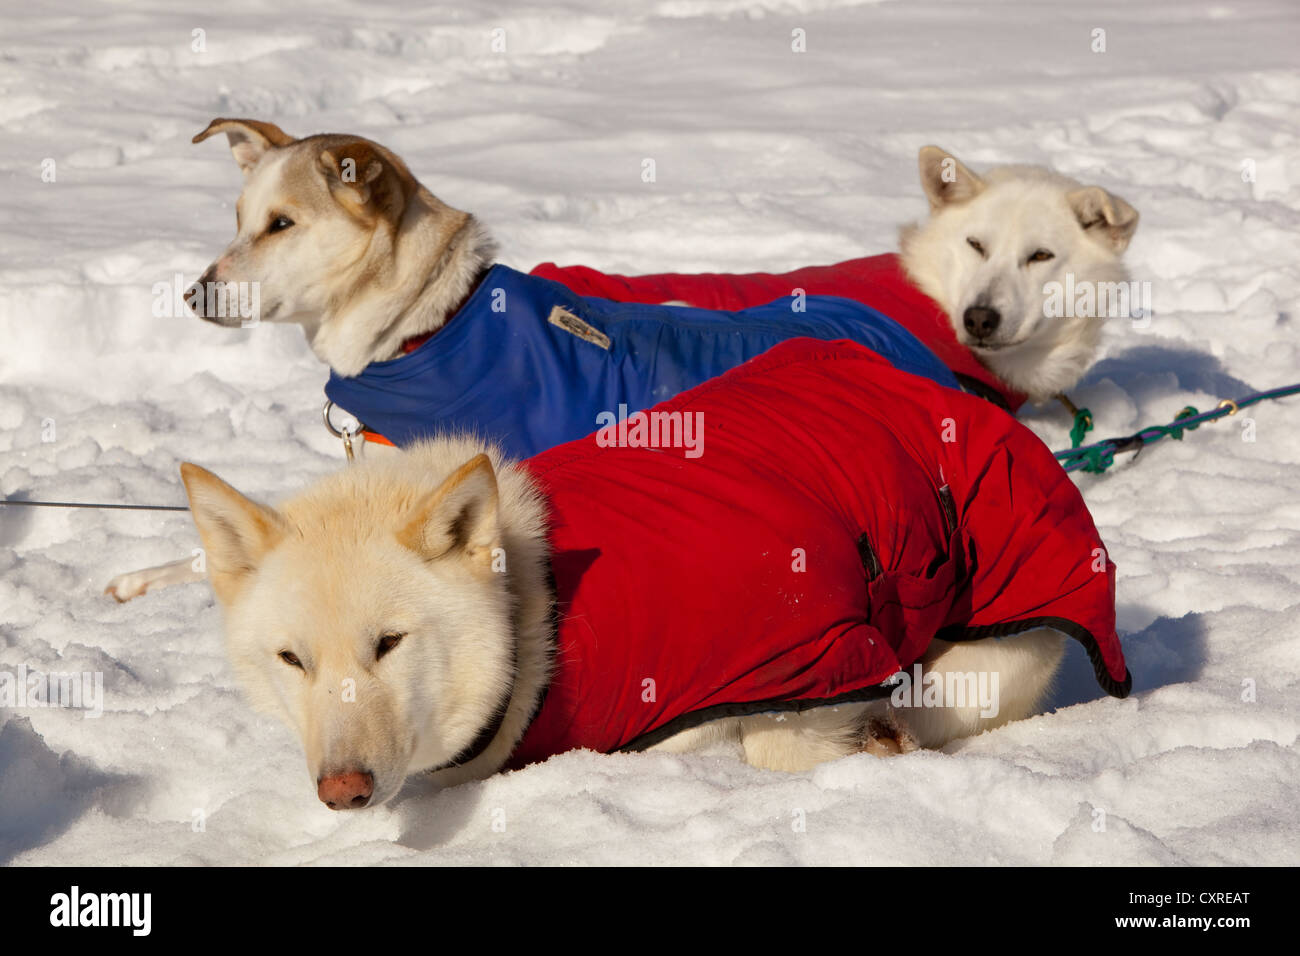 White sled dogs with dog coats resting in snow and sun, stake out cable, Alaskan Huskies, Yukon Territory, Canada Stock Photo